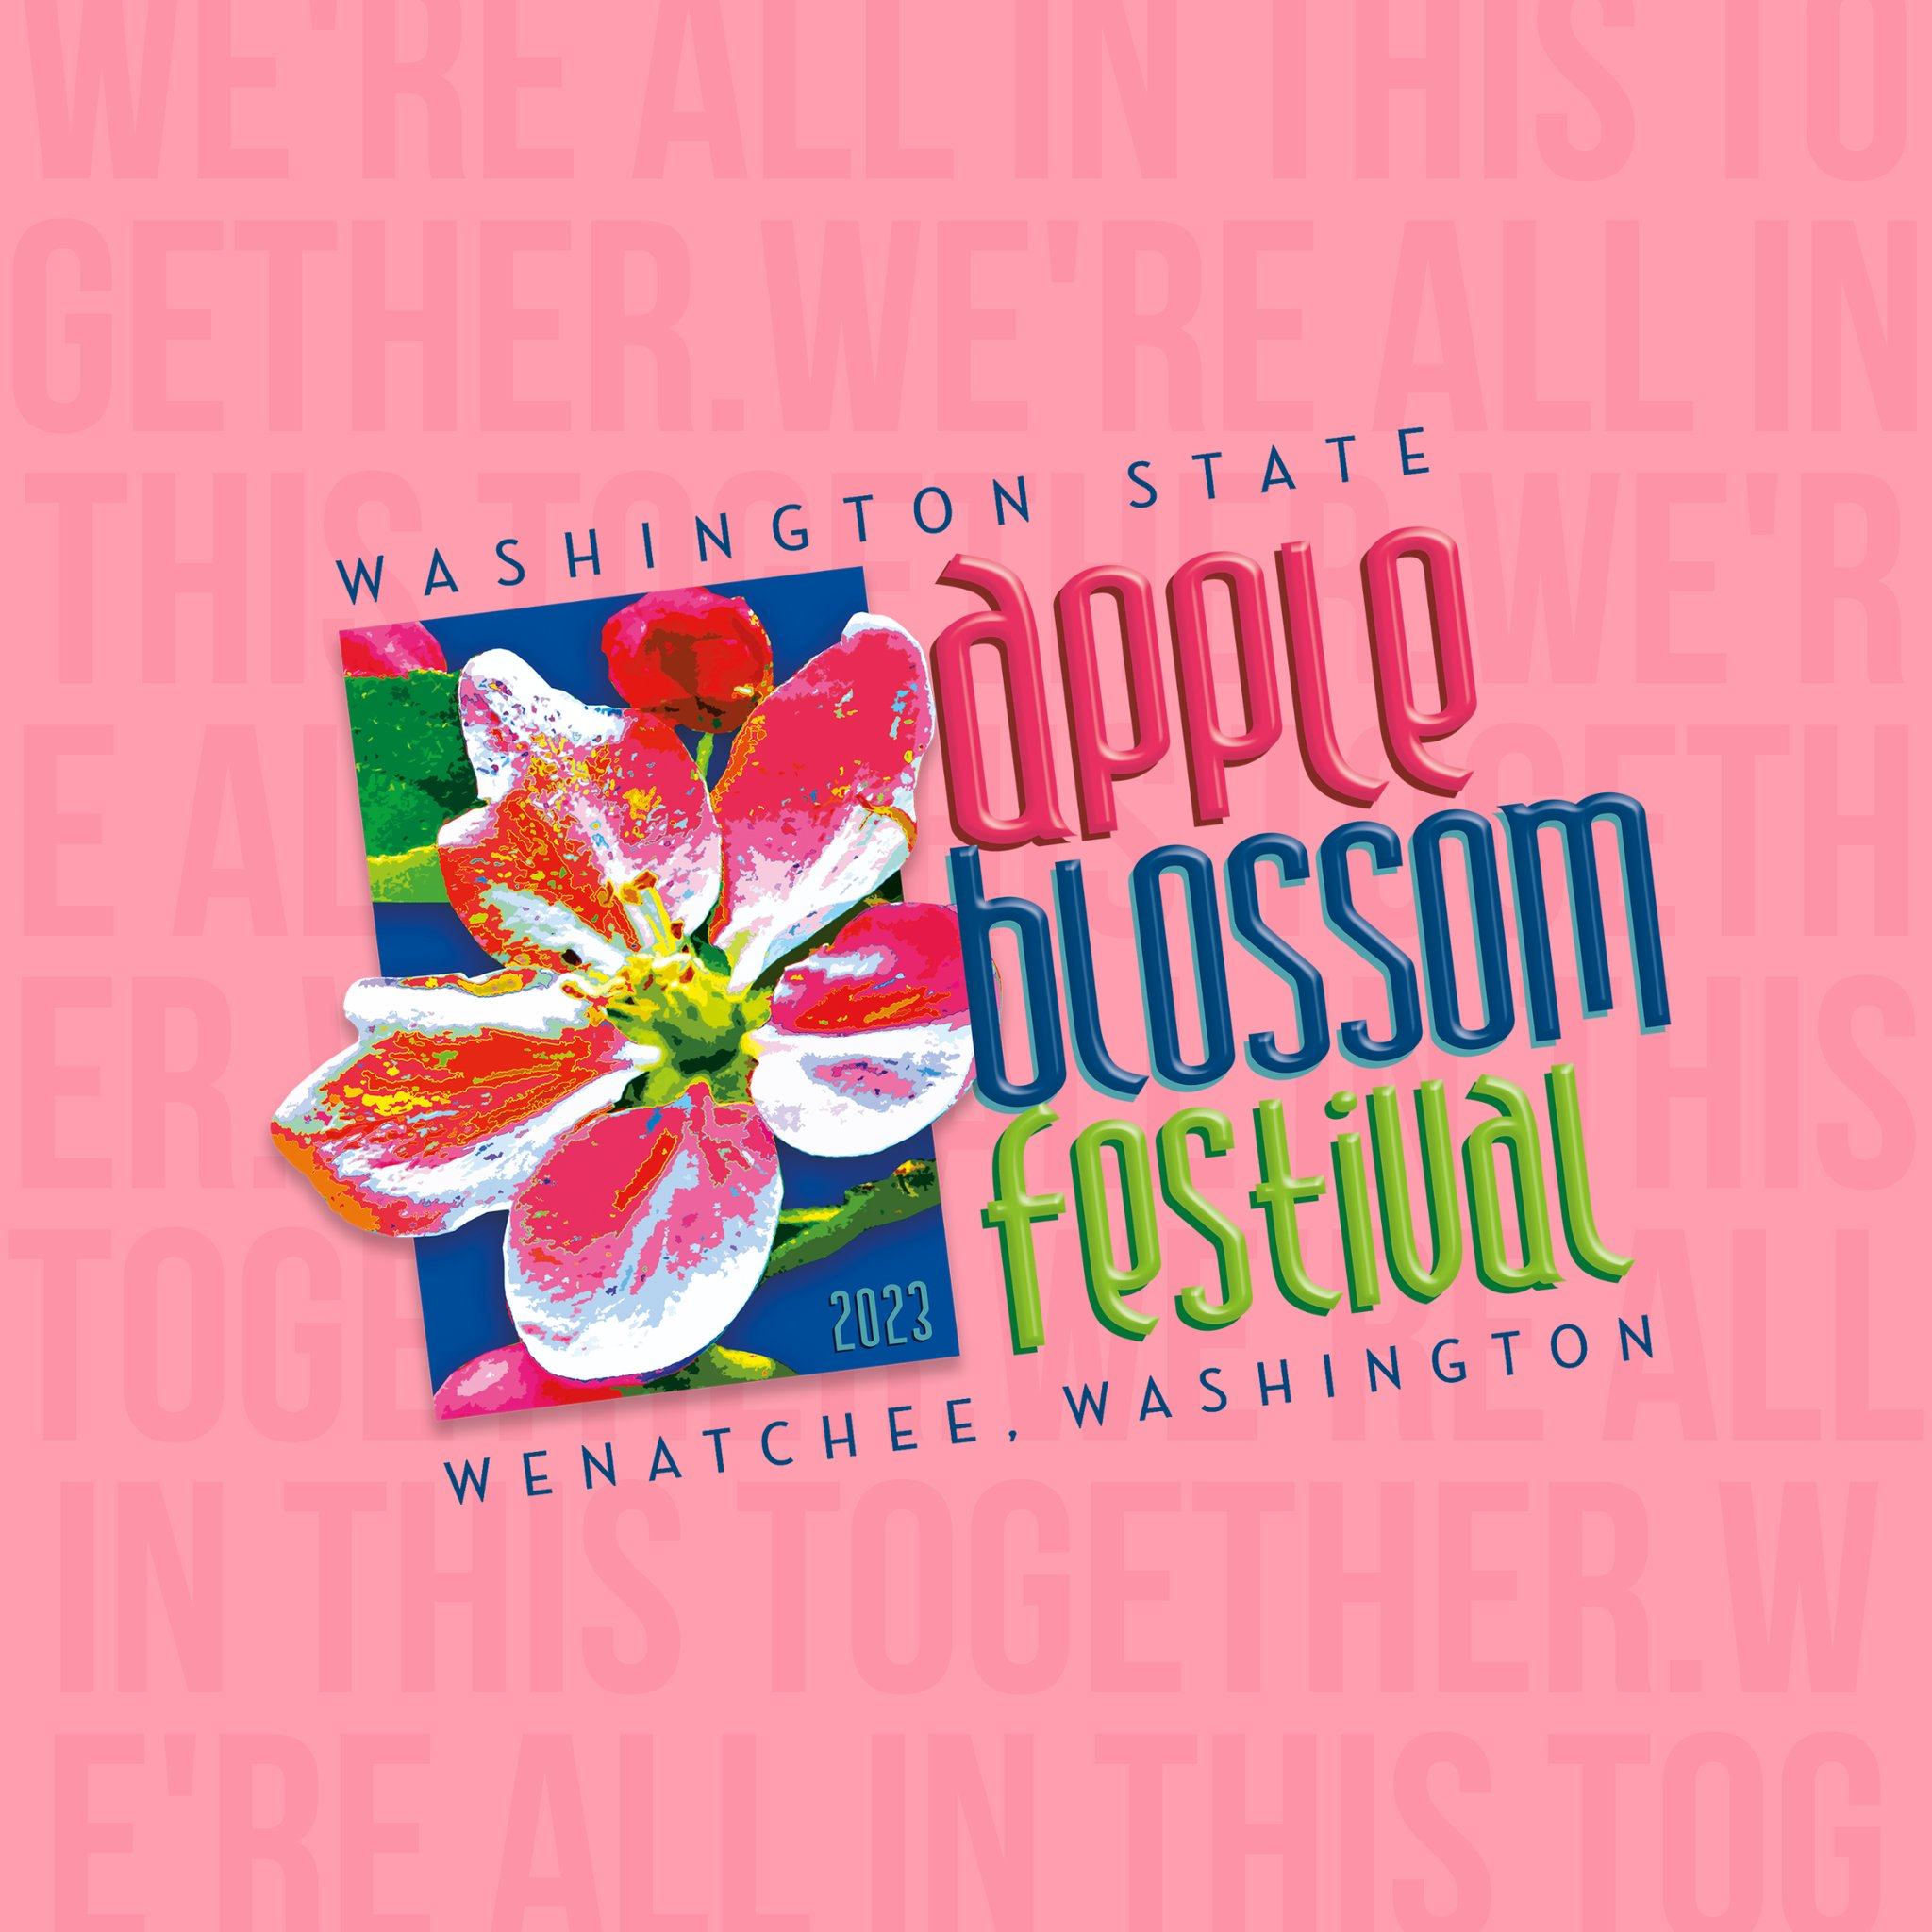 <h1 class="tribe-events-single-event-title">Apple Blossom Royalty Selection Pageant</h1>